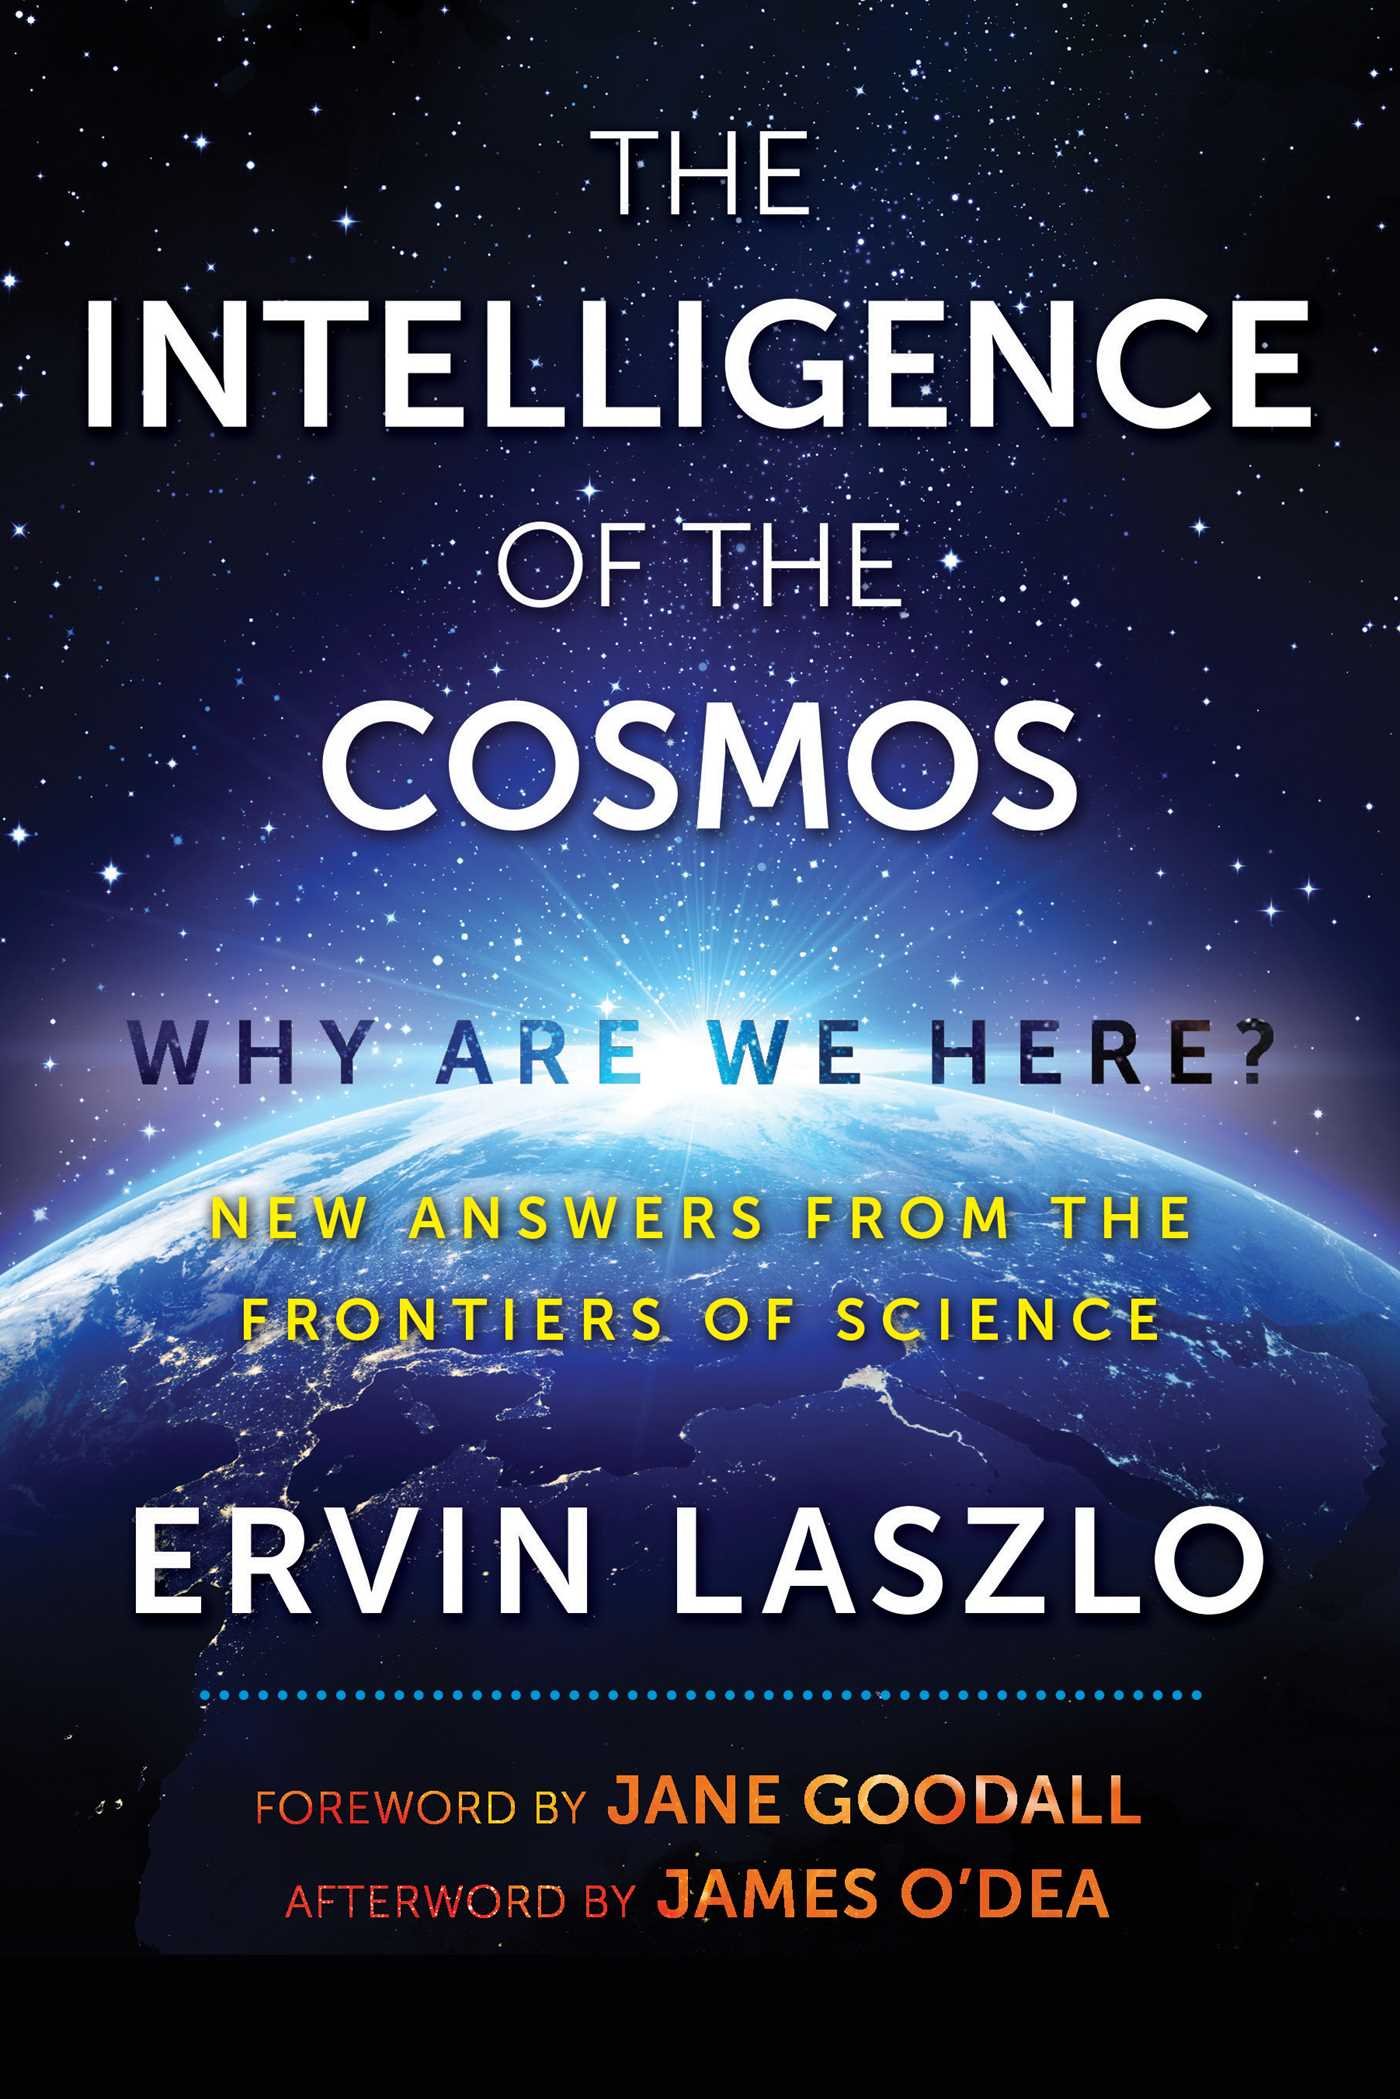 The book cover for The Intelligence of the Cosmos.